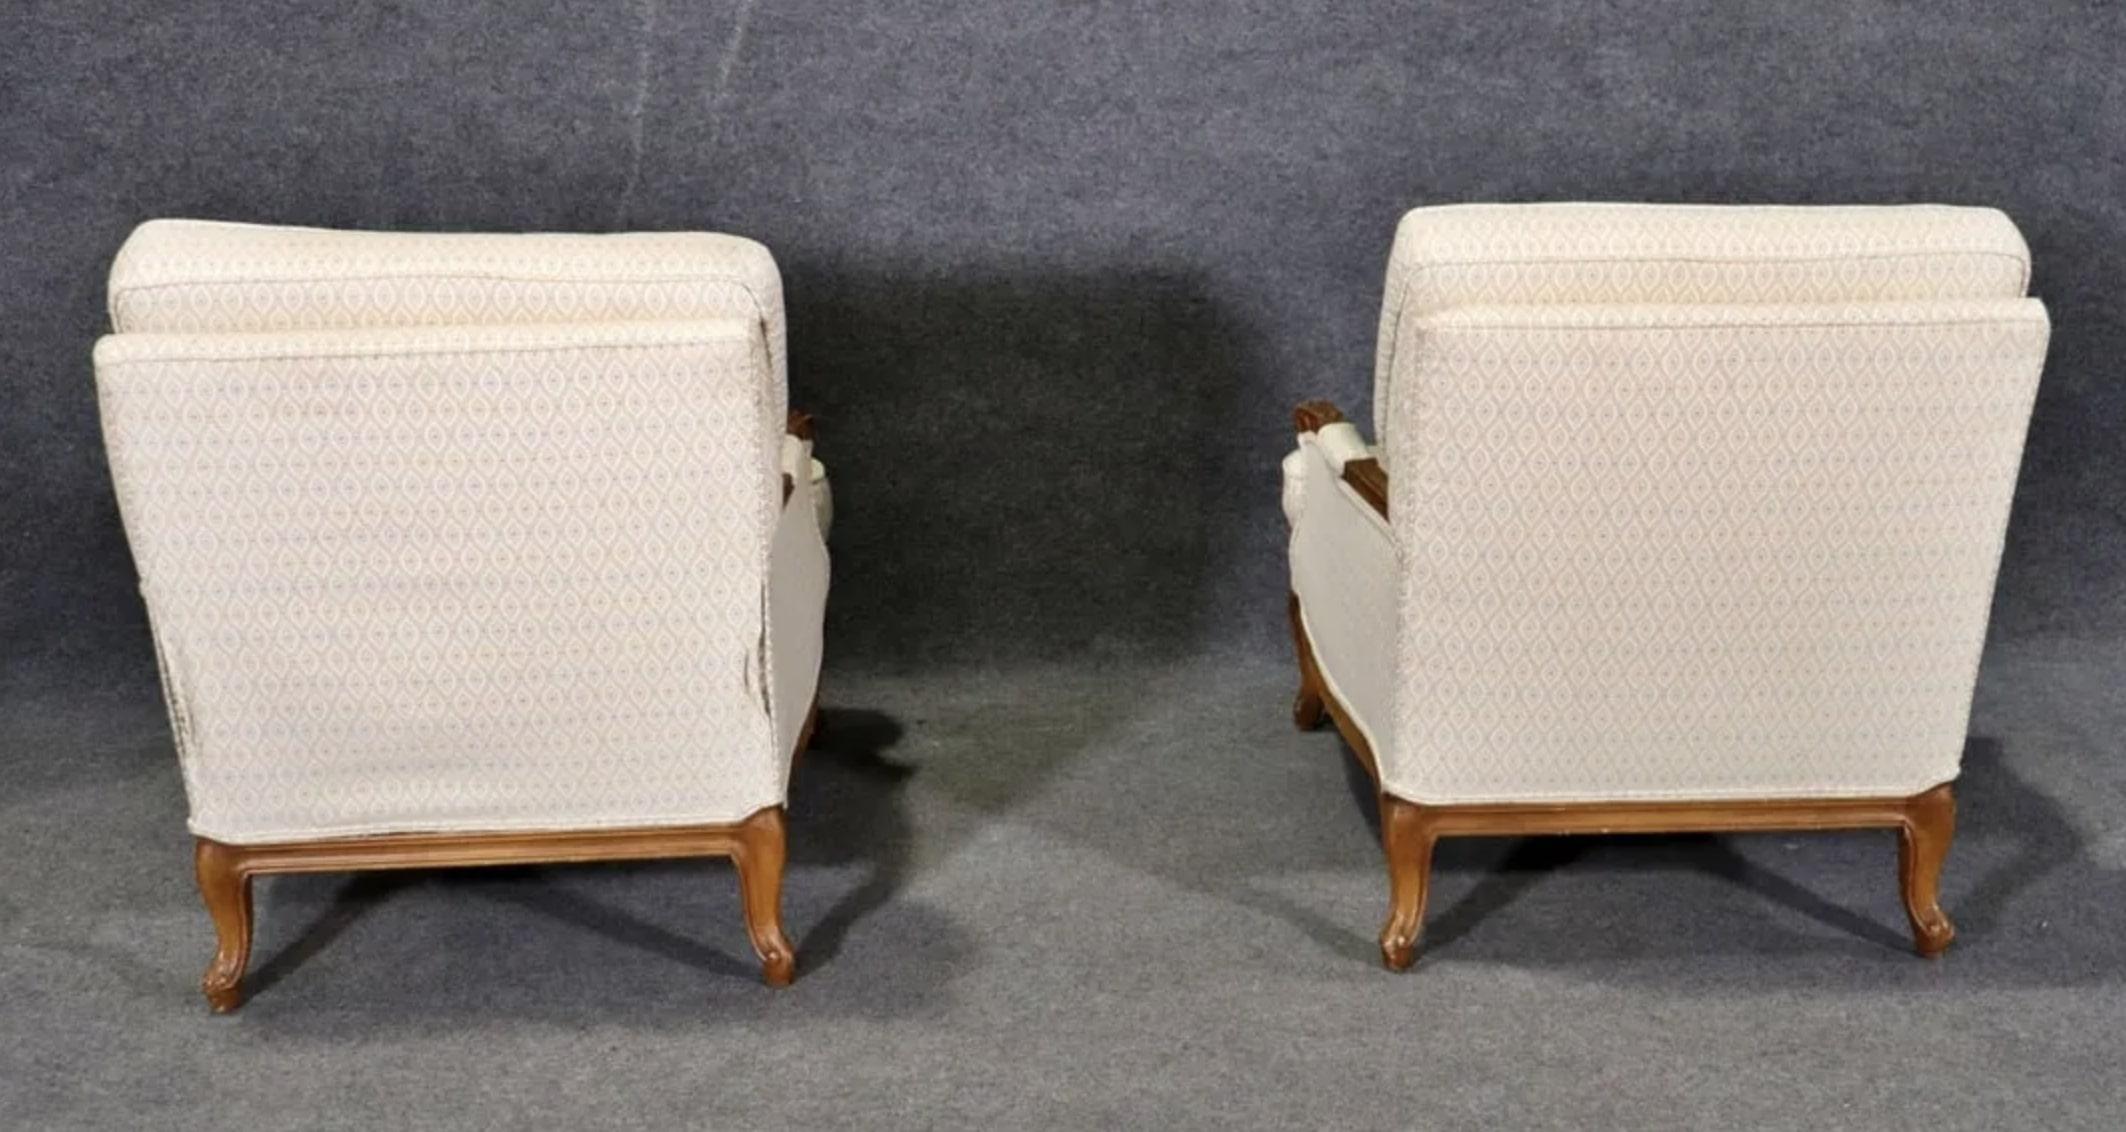 20th Century French-style Bergère Chairs For Sale